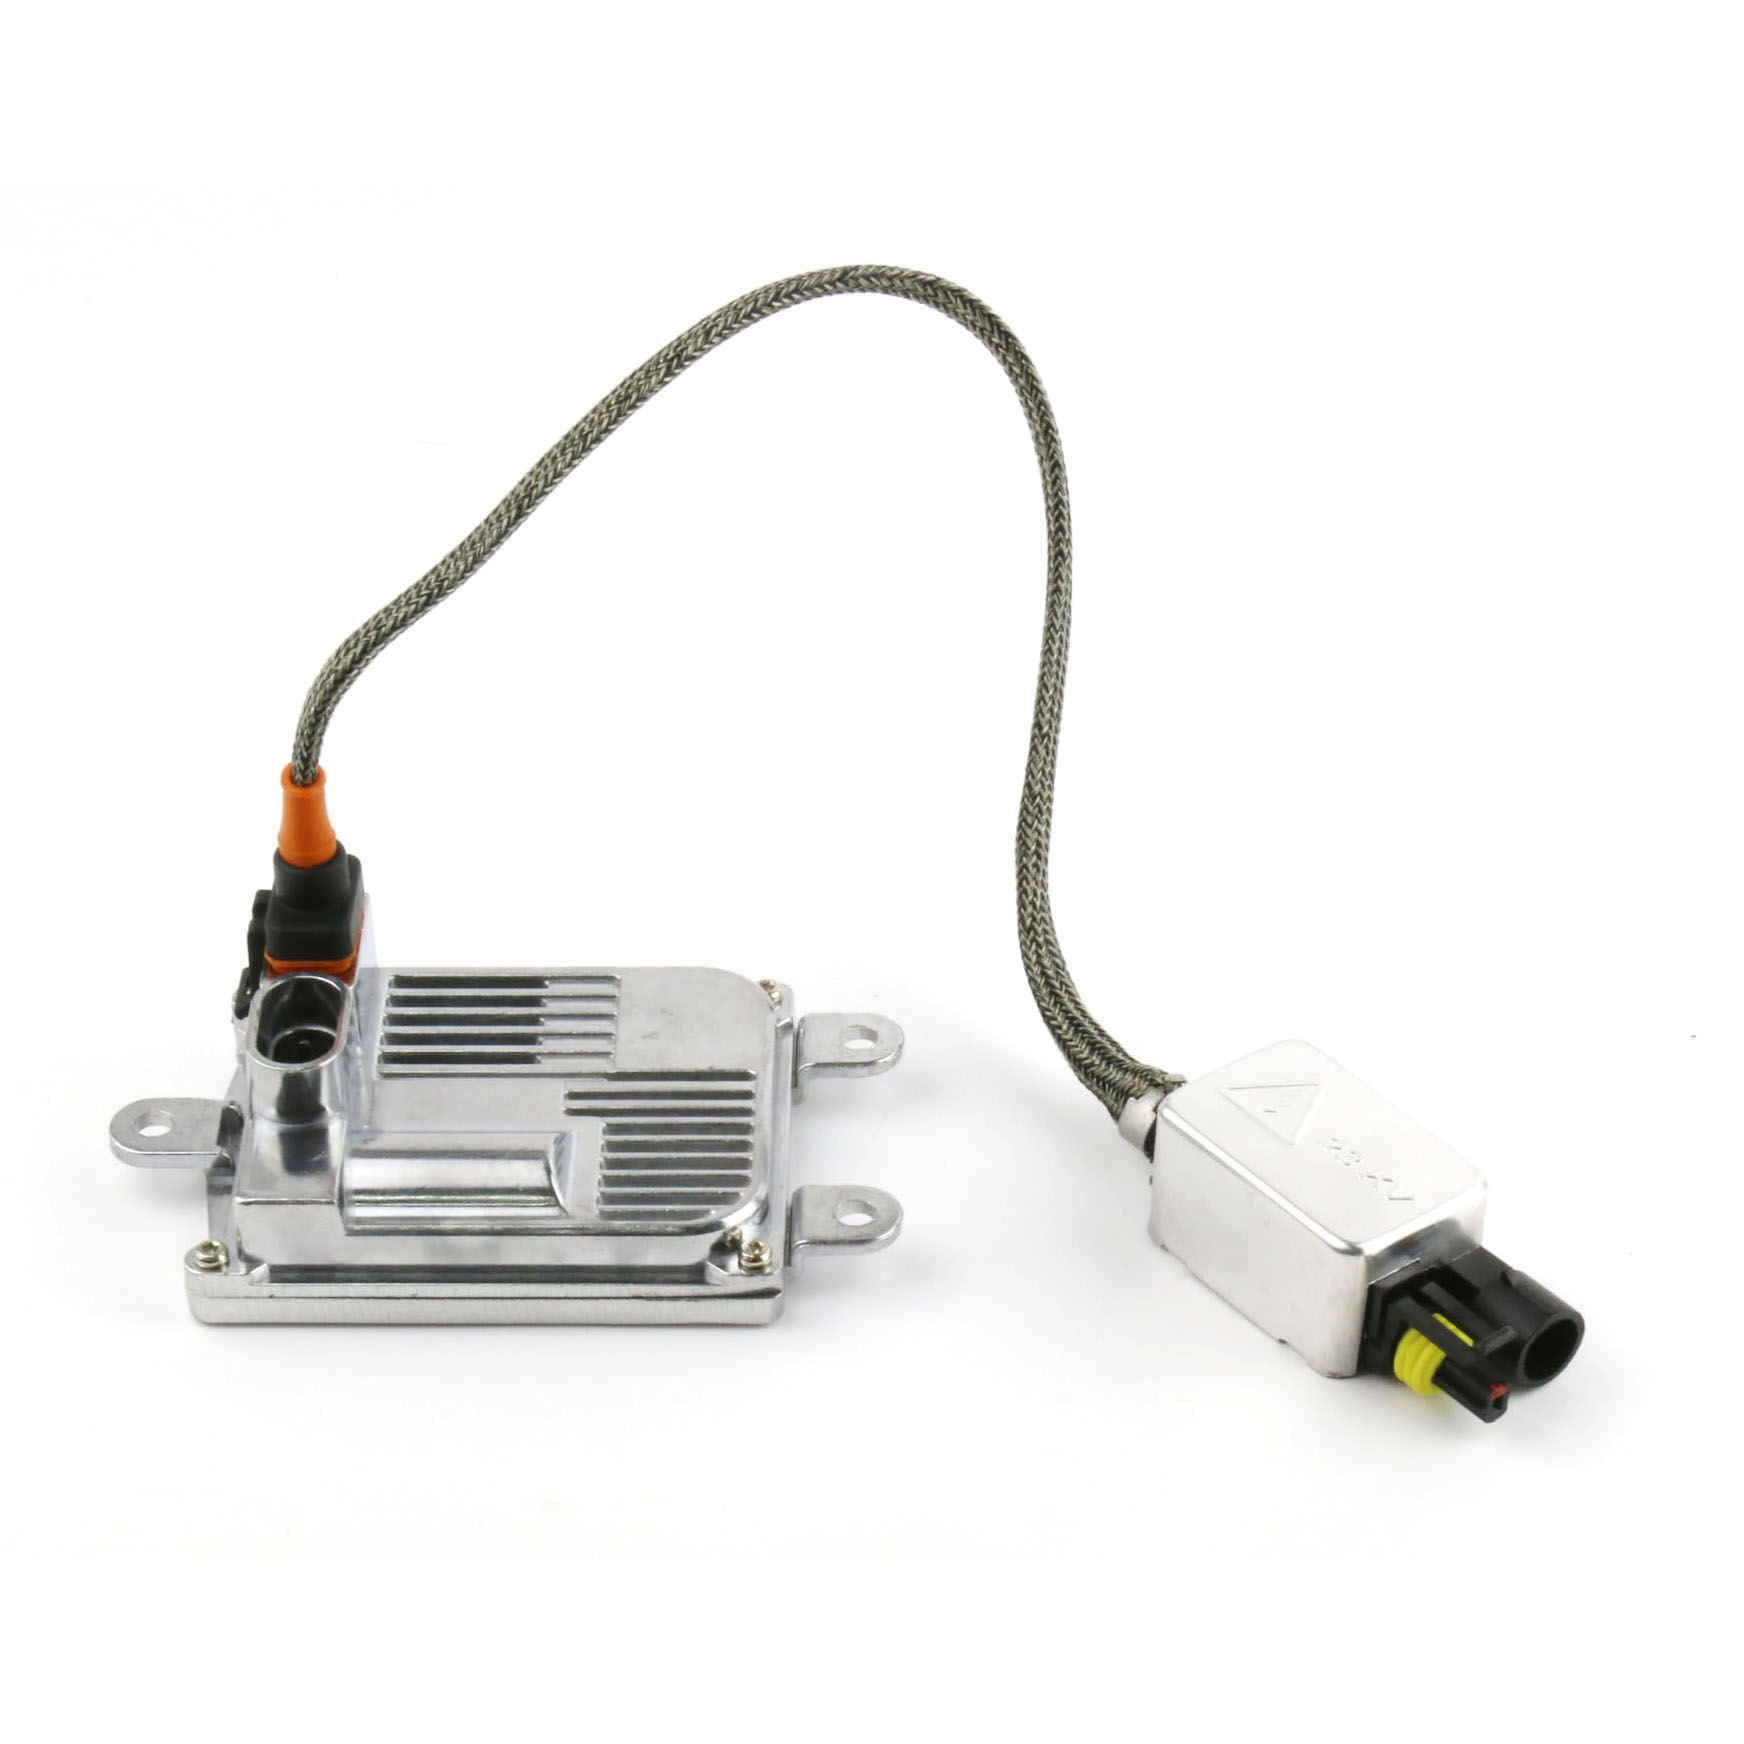 CNLM autovision hid lighting ballast with good price for sale-1